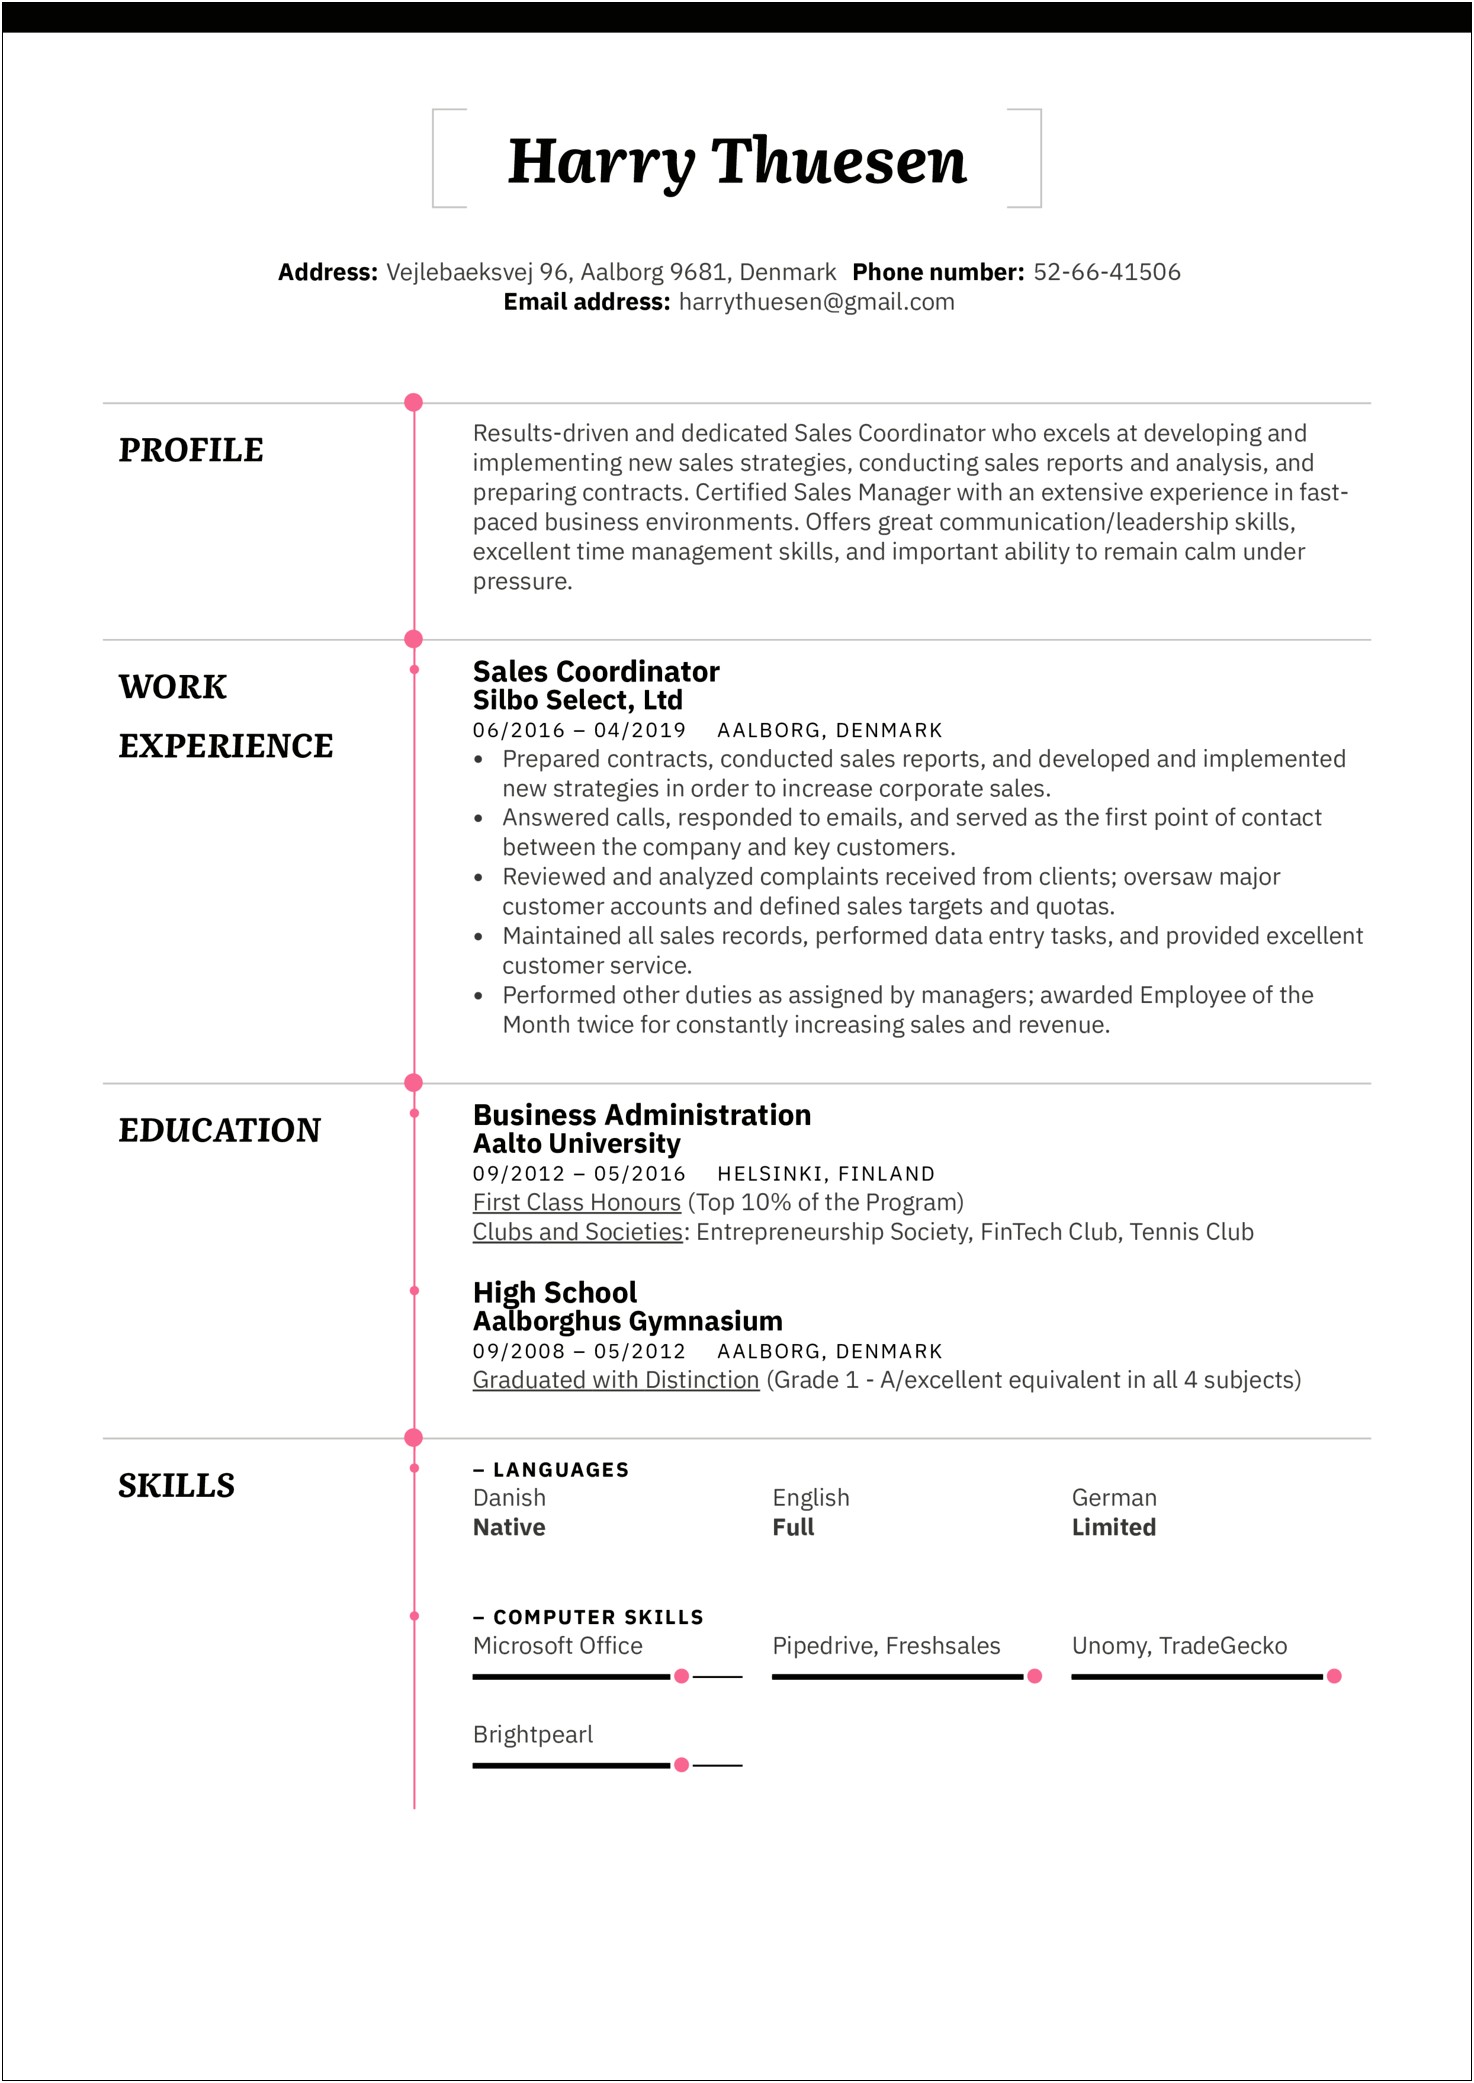 Resume Summary For A Sales Coordinator